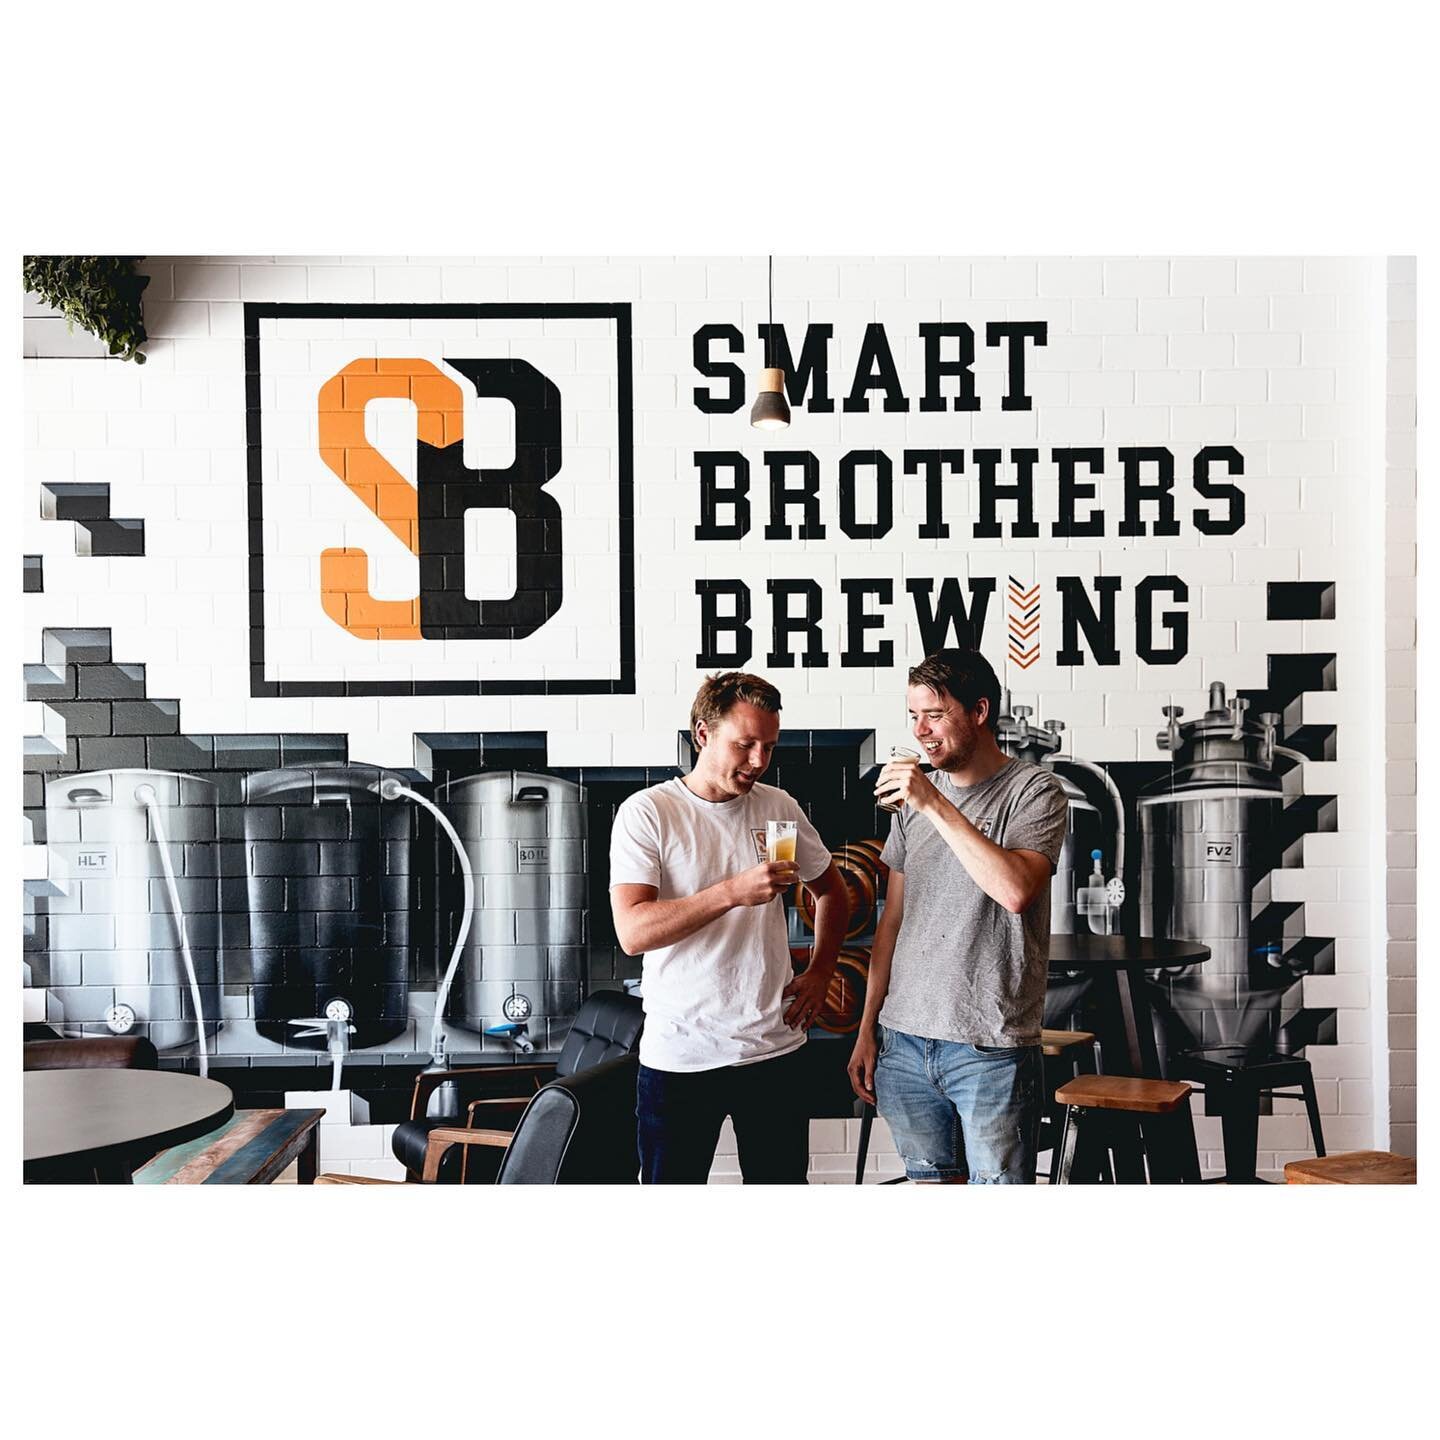 The Smart Brothers of @smartbrosbrew 

Swipe to the next slide to see their insane range of beer on tap.